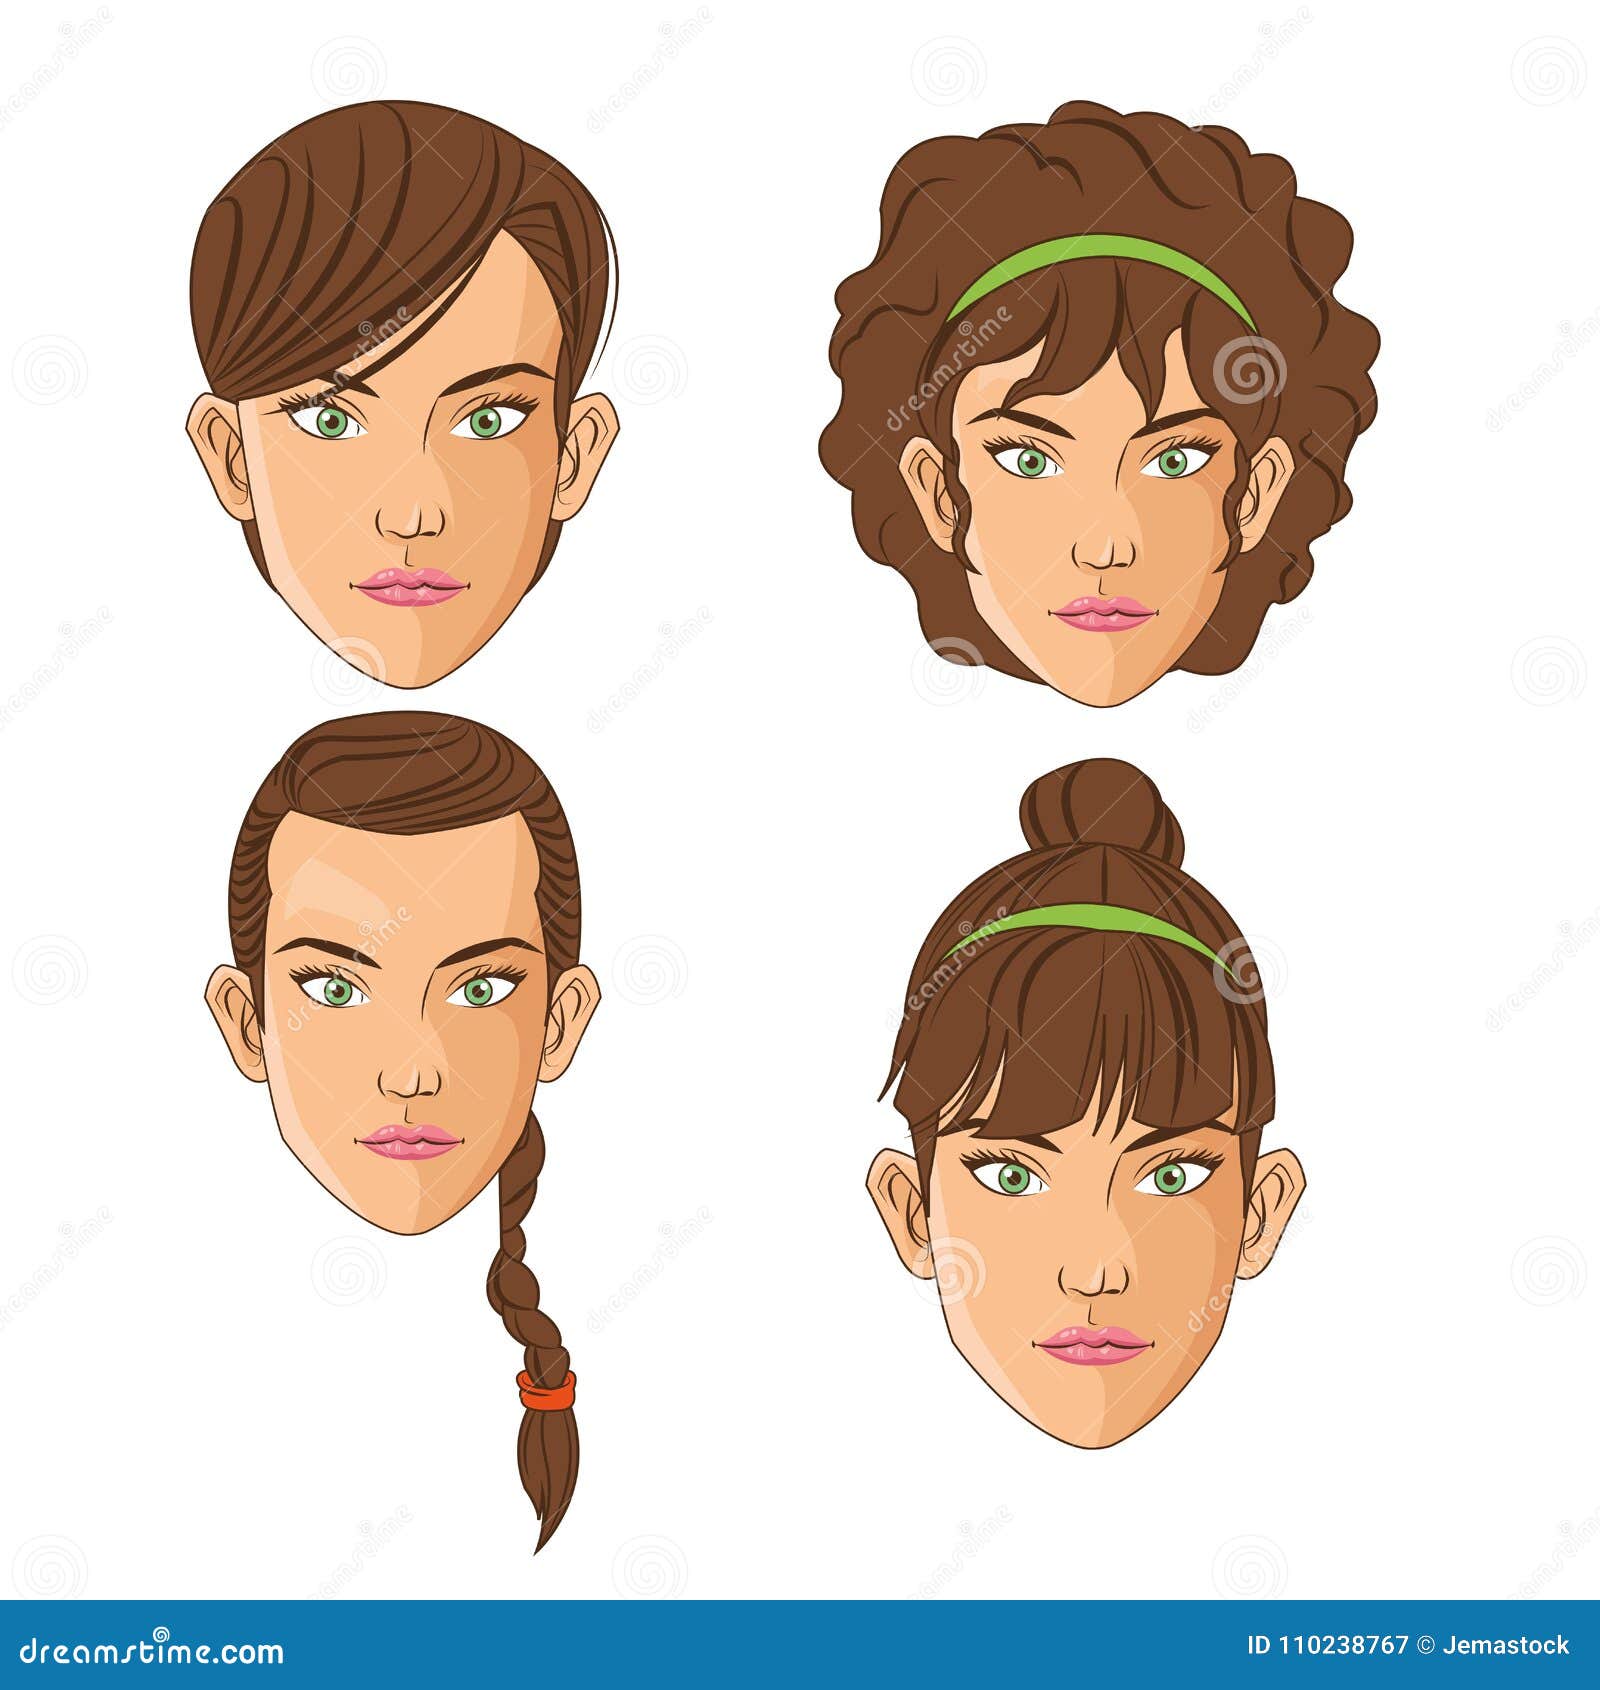 Man and hair style design stock vector. Illustration of hair - 110238767